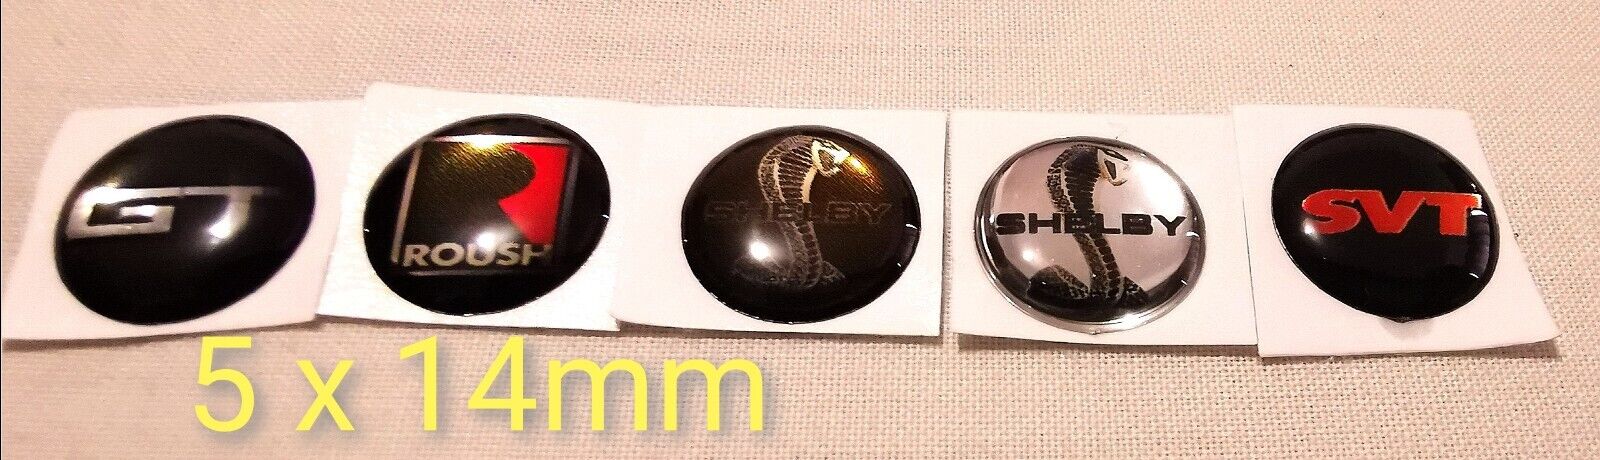 Mustang ford Shelby style logo 5 pack 14mm Key Fob Emblem Decal Logo Remote Badg